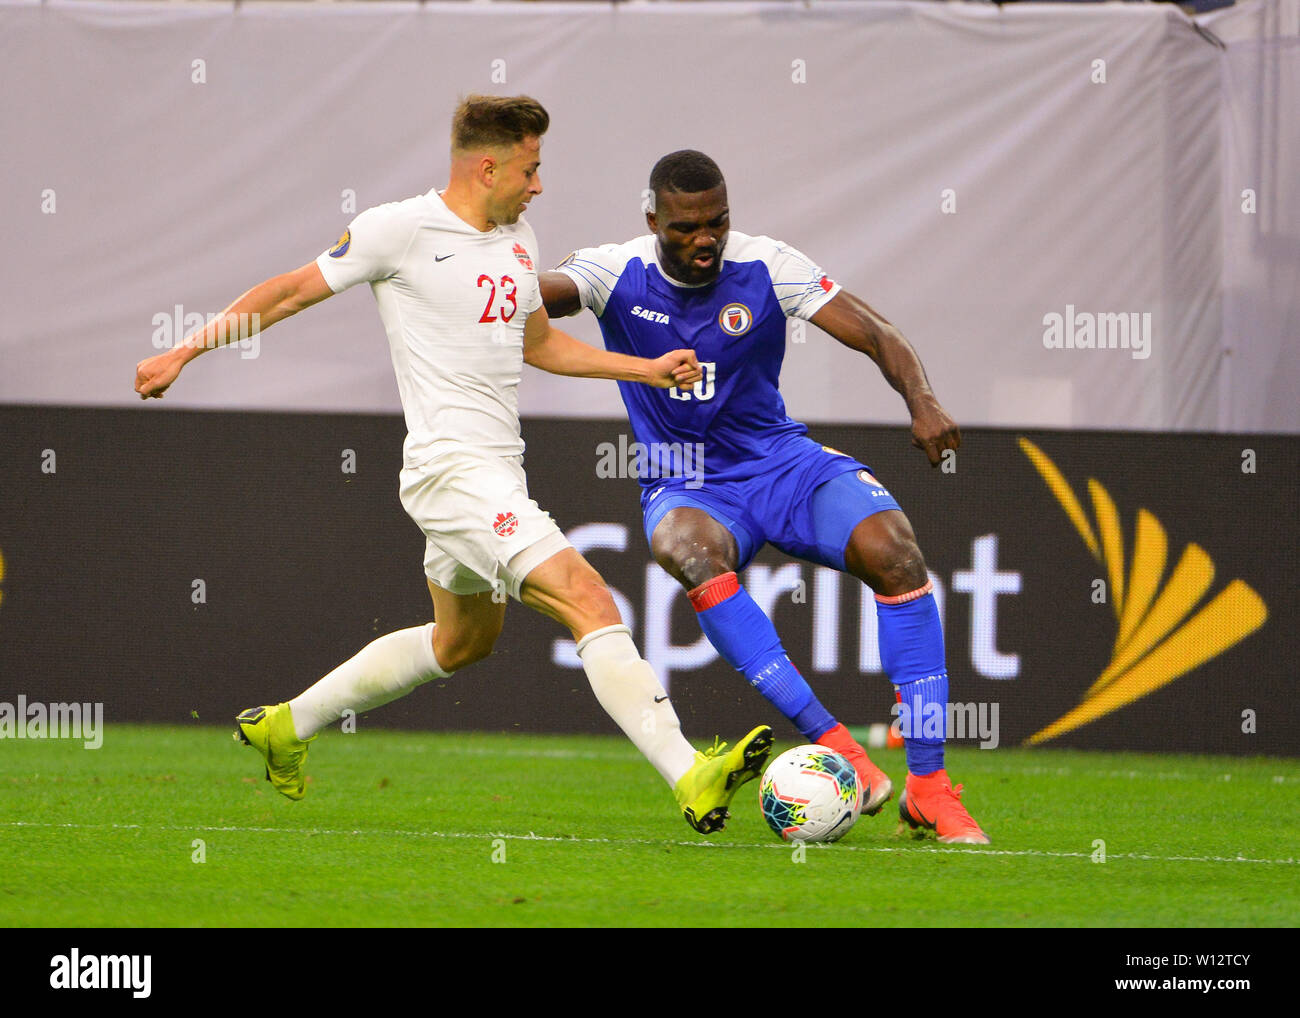 Houston, TX, USA. 29th June, 2019. Canada defender, Marcus Godindo (23), and Haiti forward, Frantzdy Pierrot (20), work for control of the ball during the 2019 CONCACAF Gold Cup, quarter final match between Haiti and Canada, at NRG Stadium in Houston, TX. Mandatory Credit: Kevin Langley/Sports South Media/CSM/Alamy Live News Stock Photo